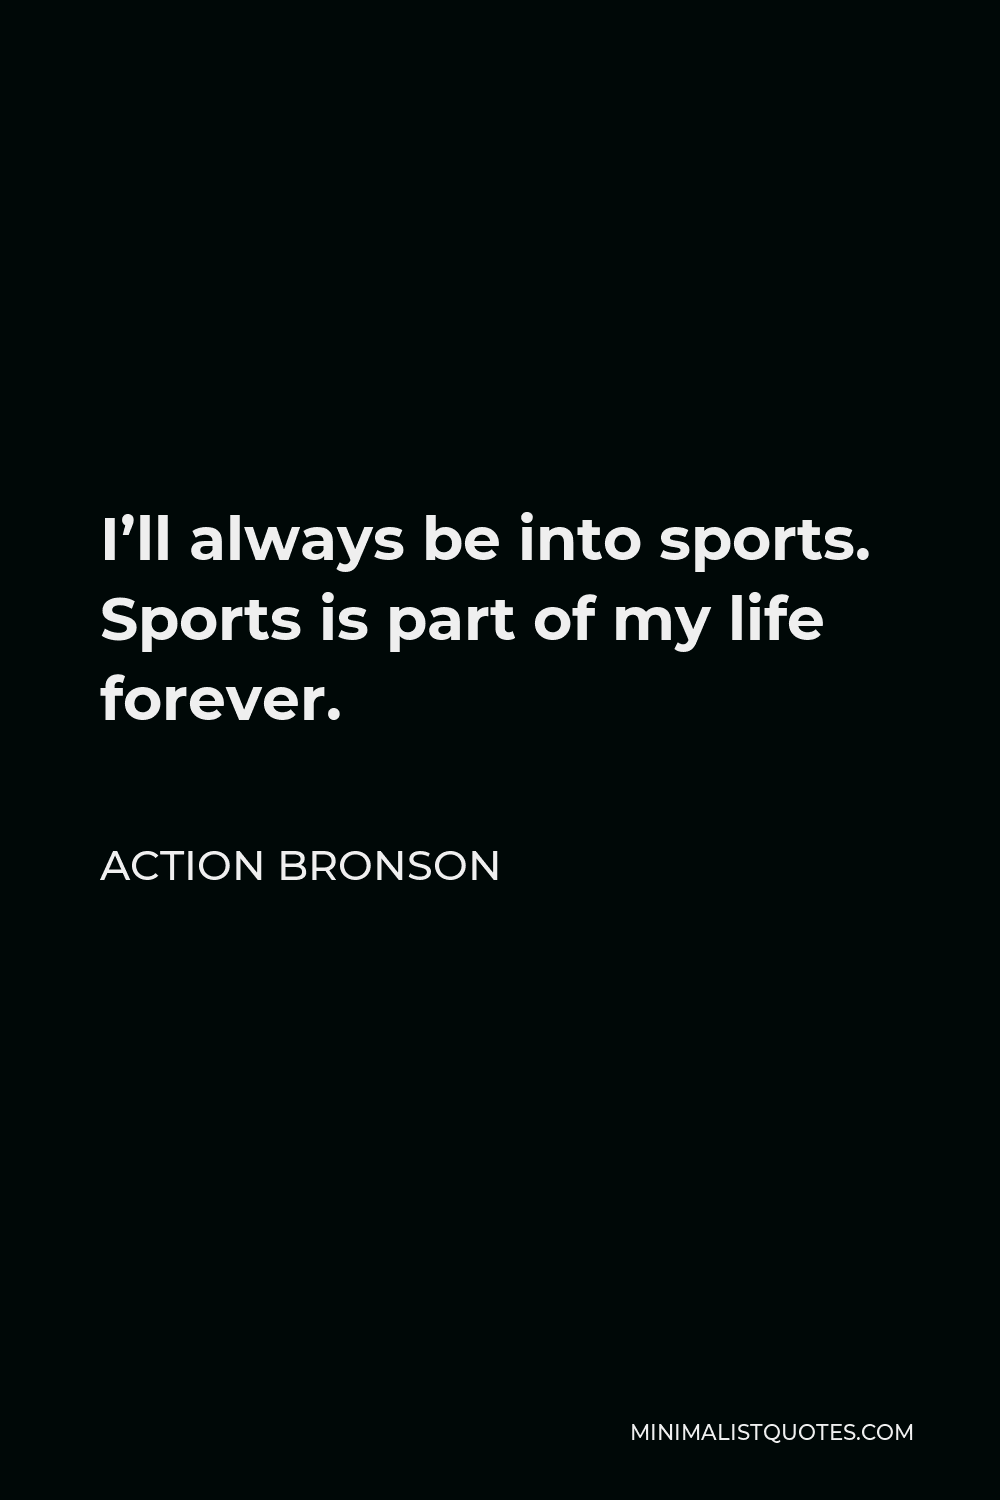 Action Bronson Quote - I’ll always be into sports. Sports is part of my life forever.